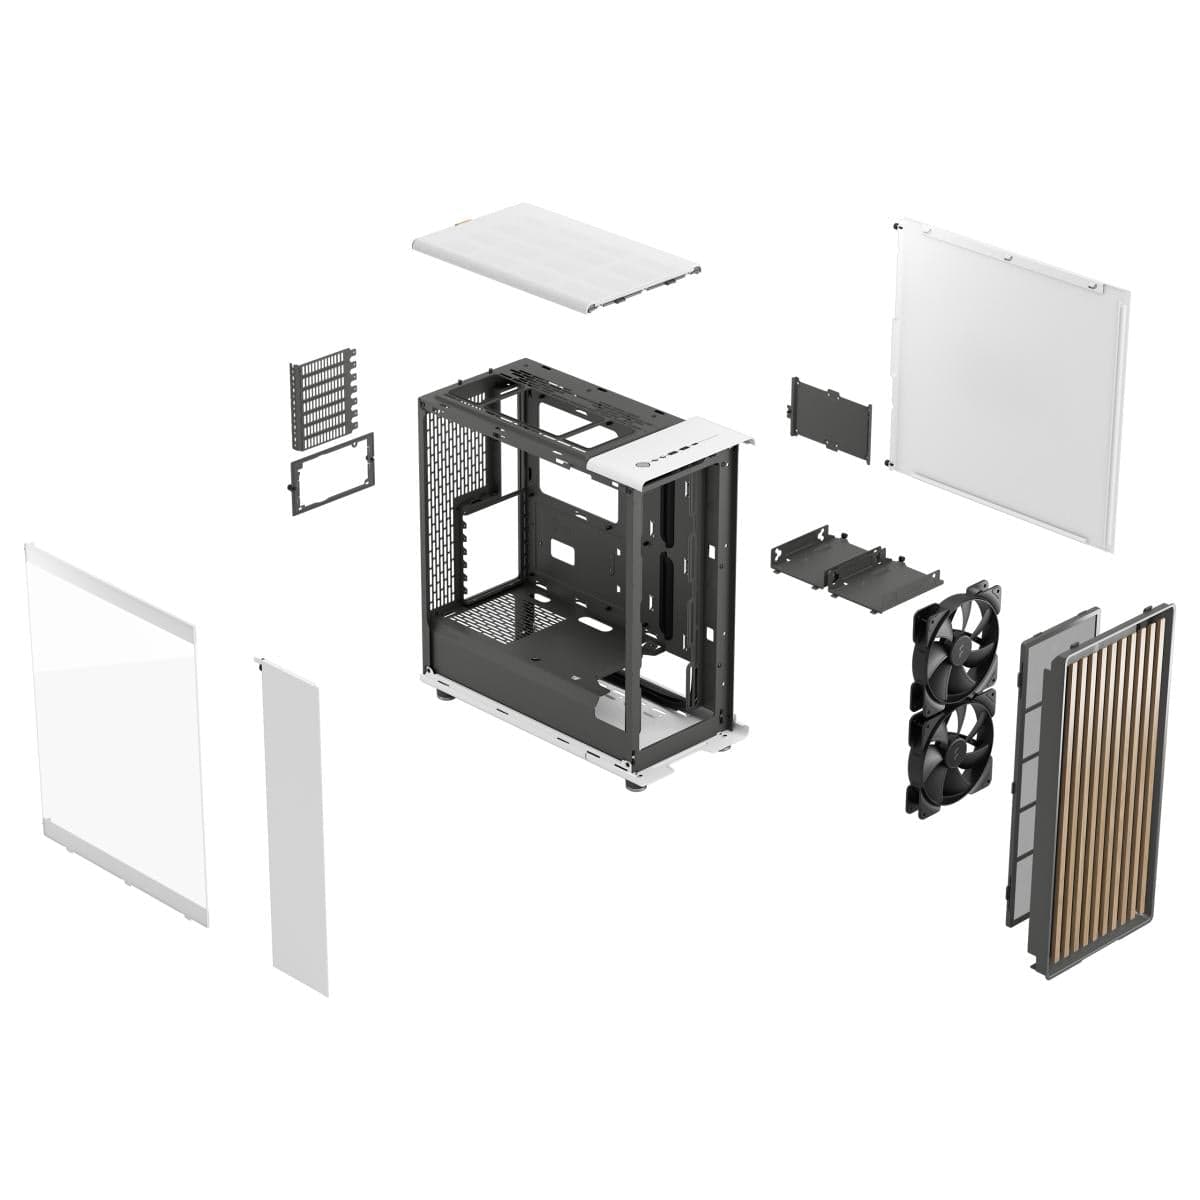 Fractal PC CASE Fractal Design North (Chalk White Mesh Ventilated Side) Mid-Tower Elegance Front Wood Gaming Case w/ Type-C & (Front) 2 x 140 mm PWM Fans